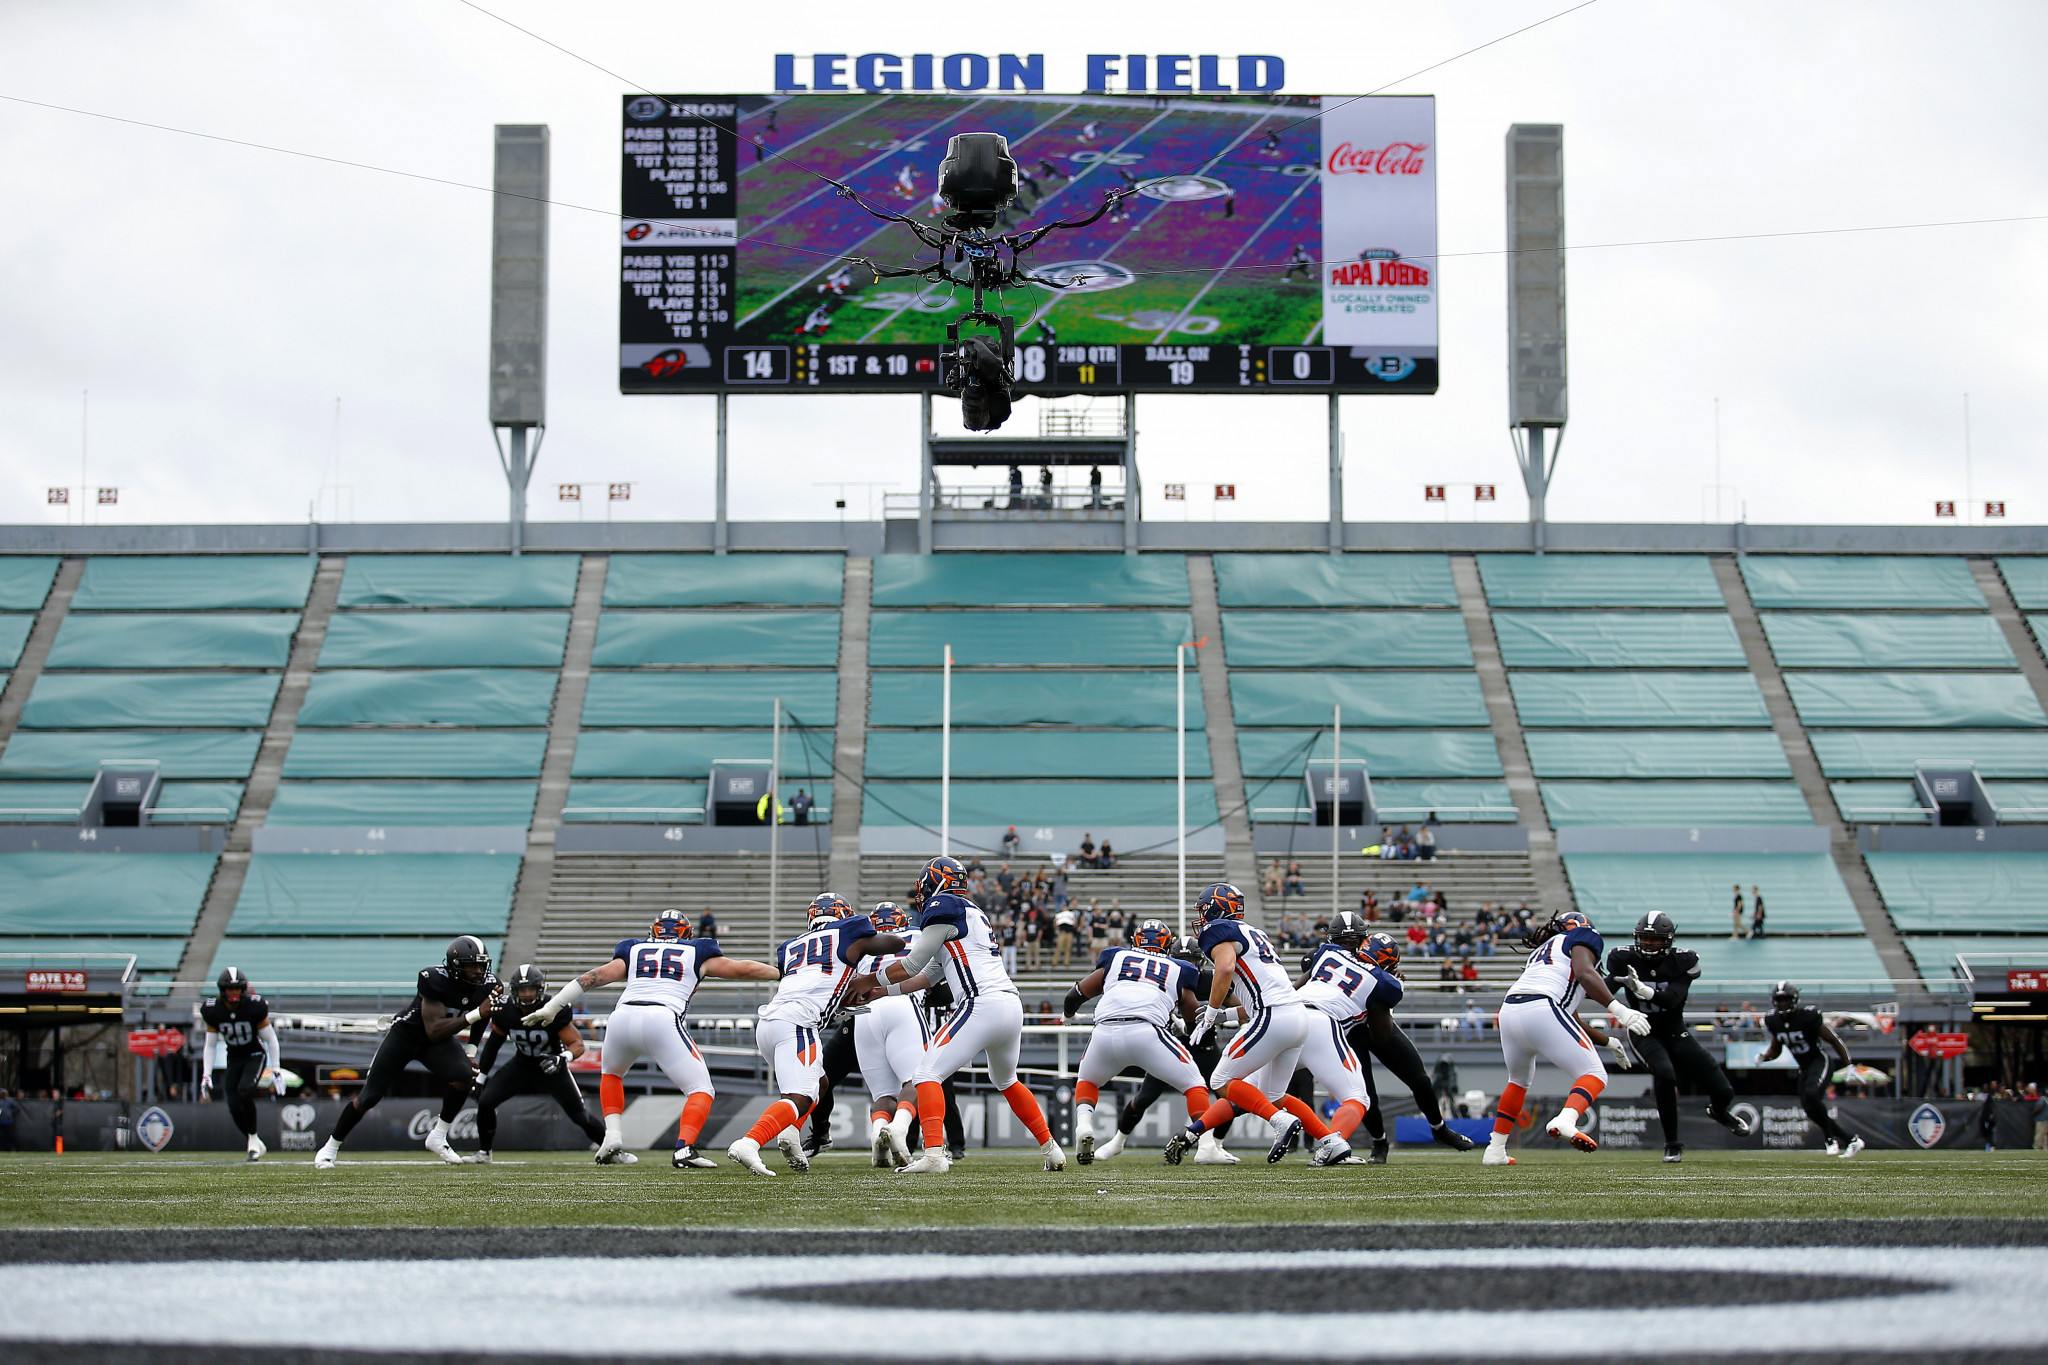 Legion Field is due to host flag football at the World Games 2022 ©Getty Images